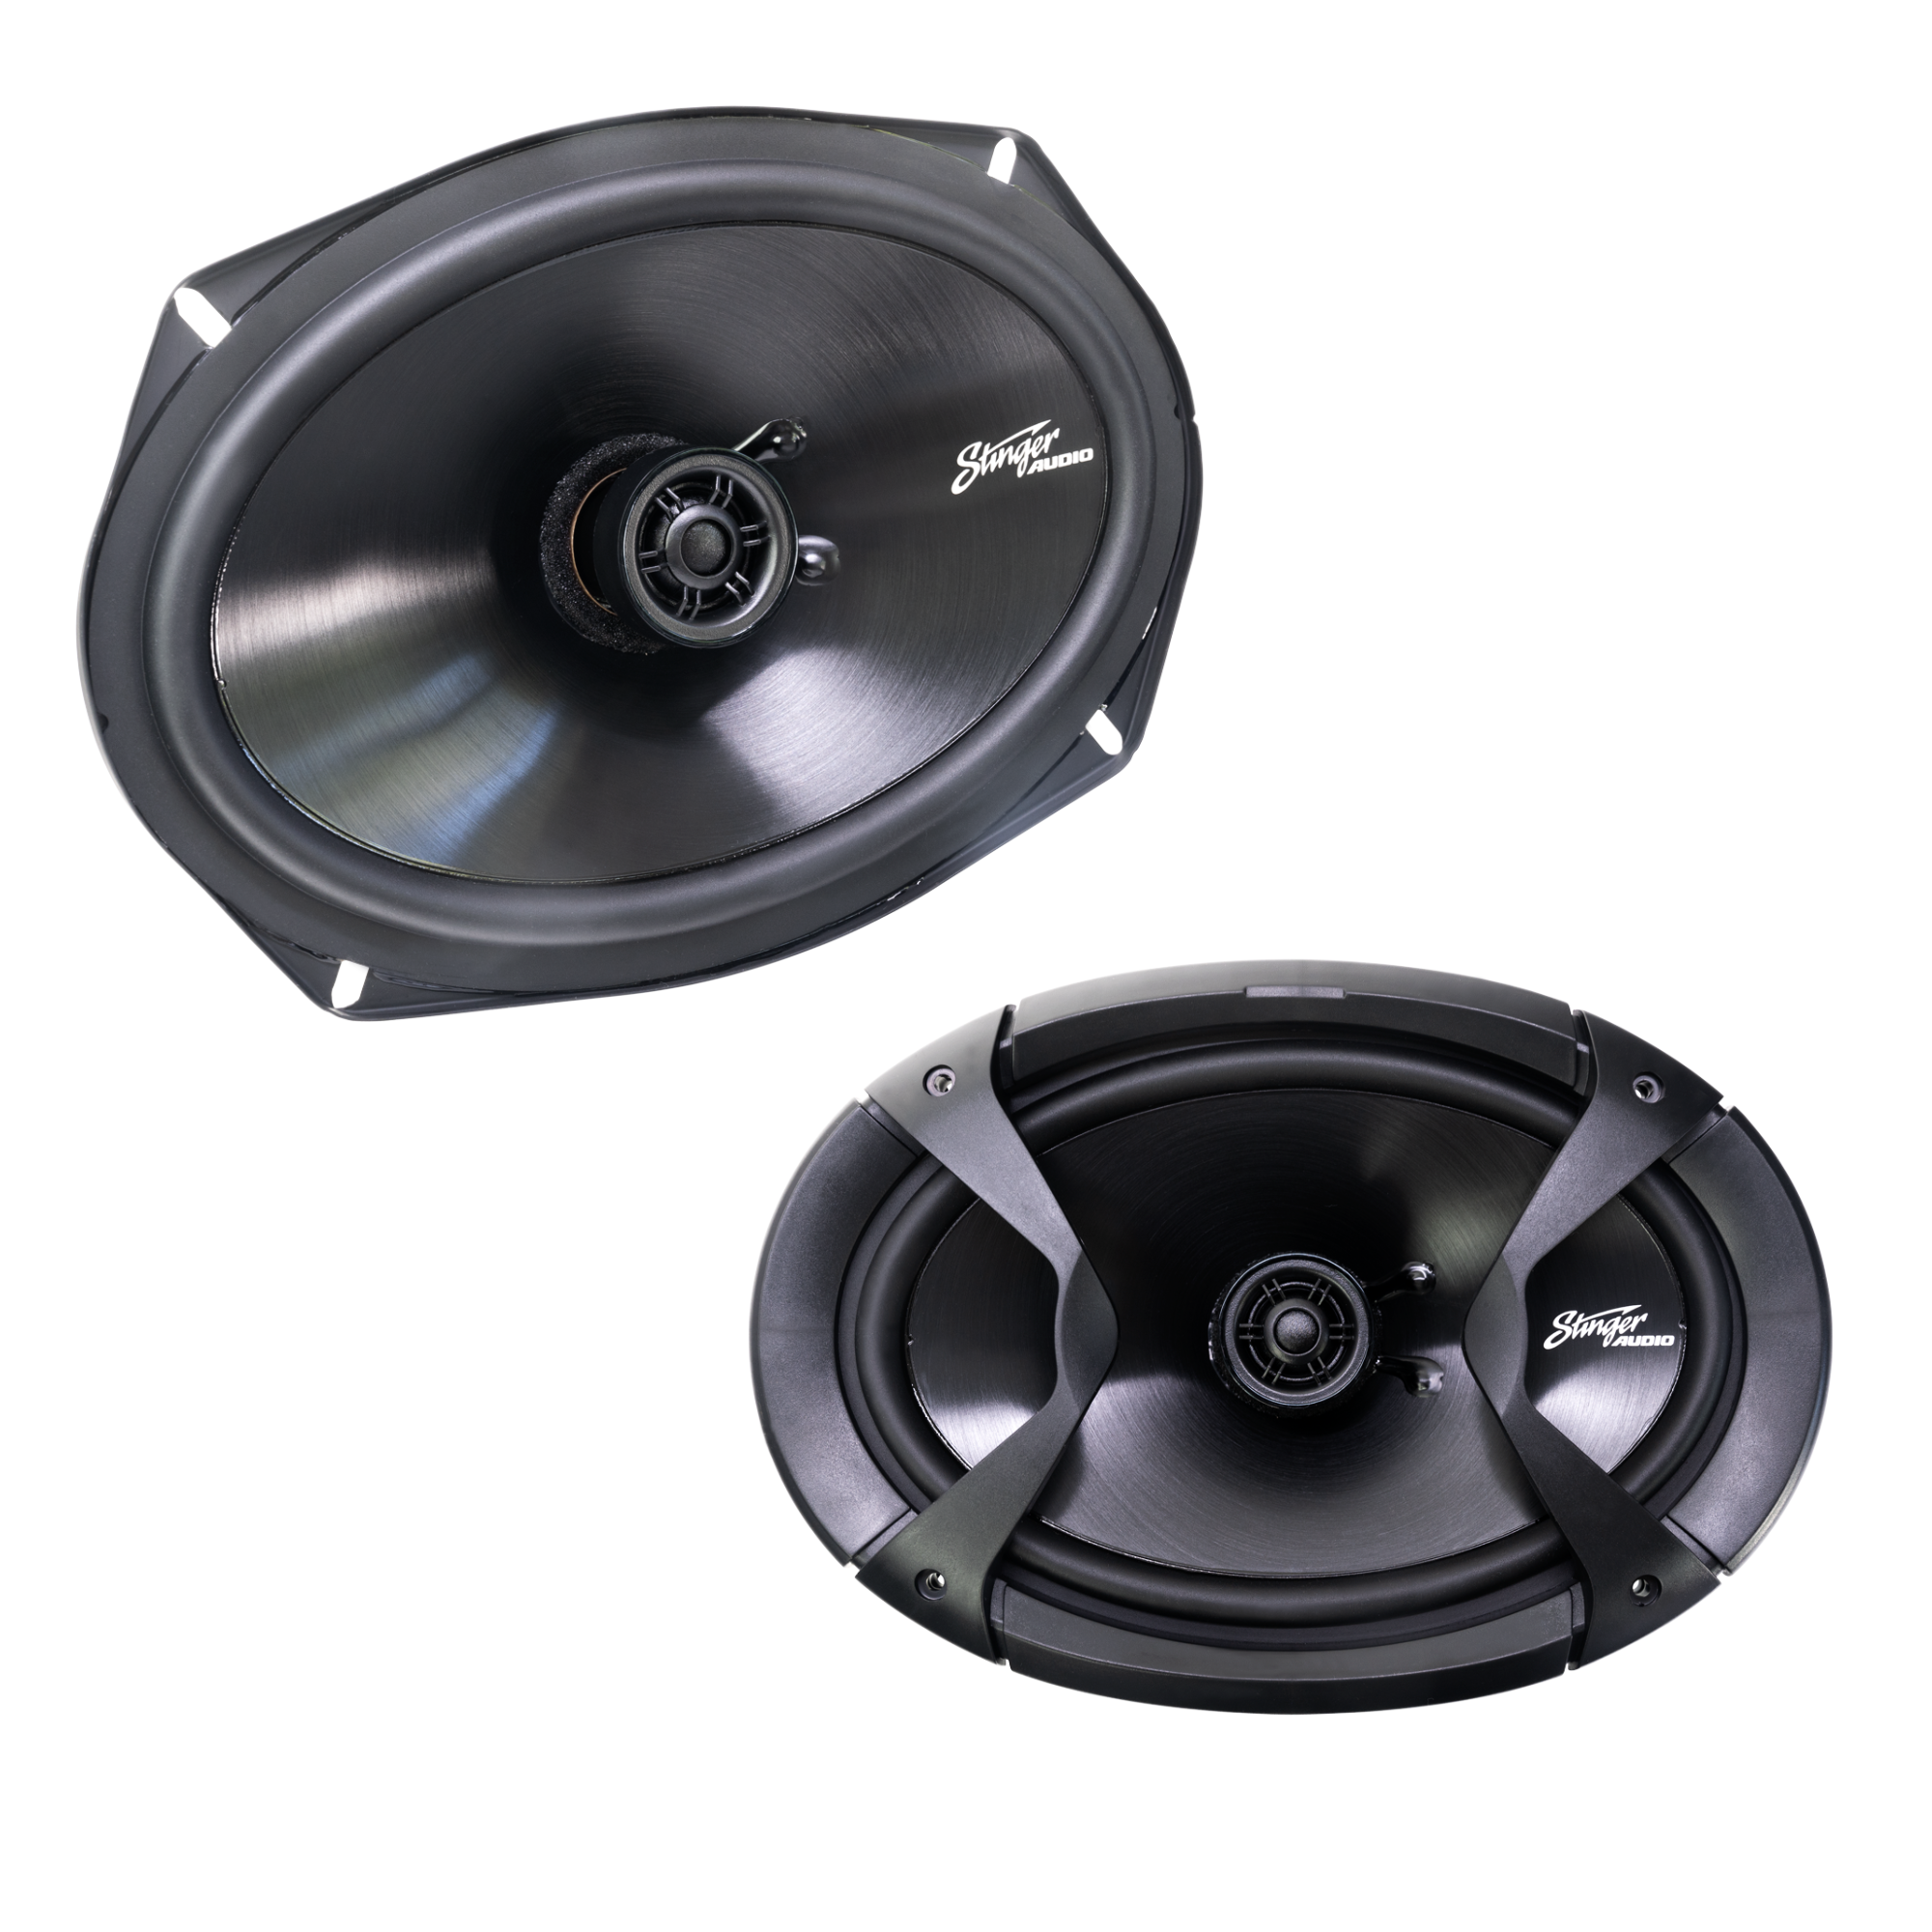 Stinger Audio 6x9" 50 Watt (RMS) Coaxial Car Speakers (Set of Two; one with grill and one without) on a white background